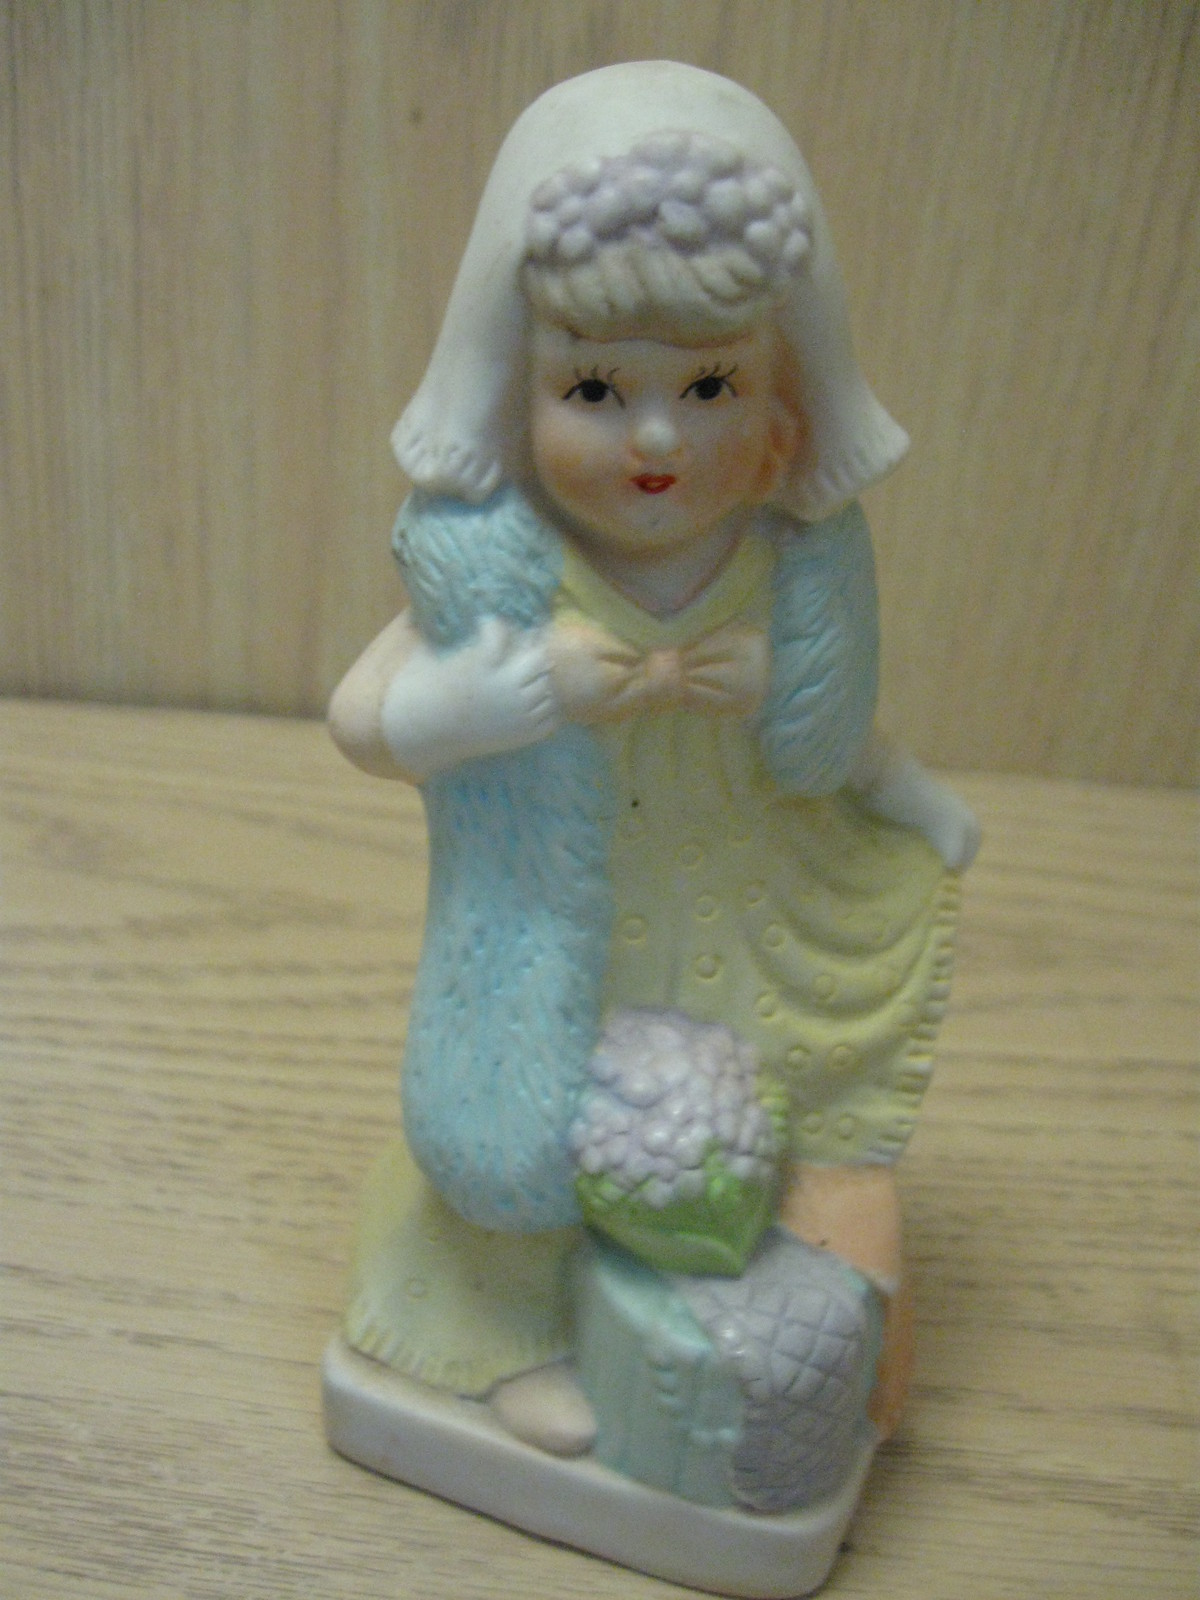 Primary image for Ceramic Statue Little Girl Playing Dress Up Figurine